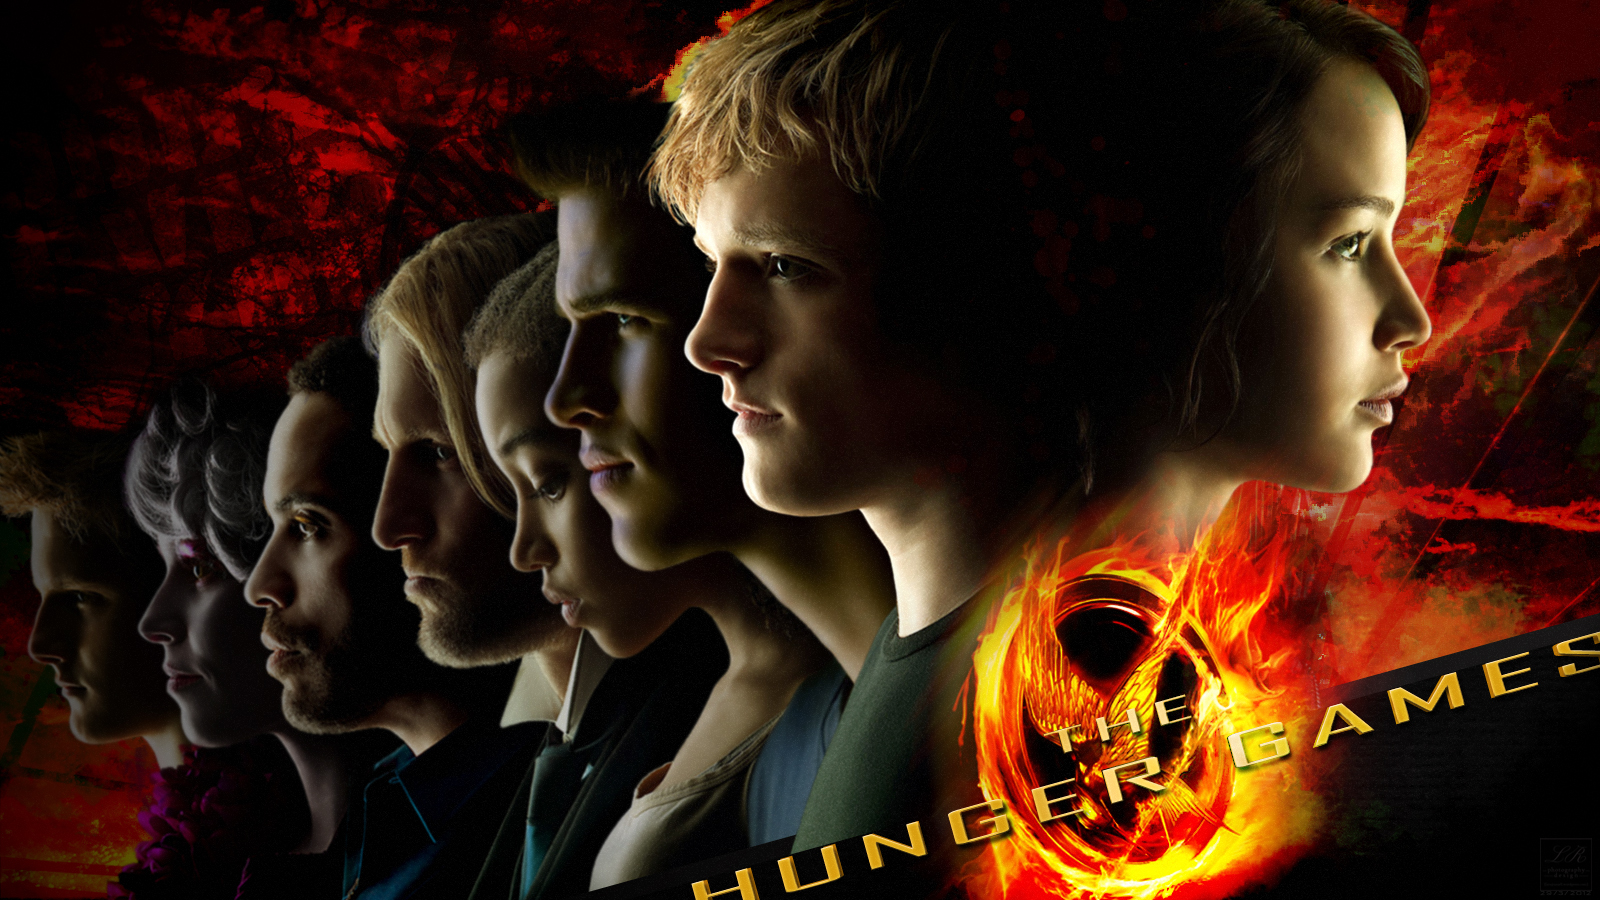 The Hunger Games images The Hunger Games wallpaper photos 30366729 1600x900